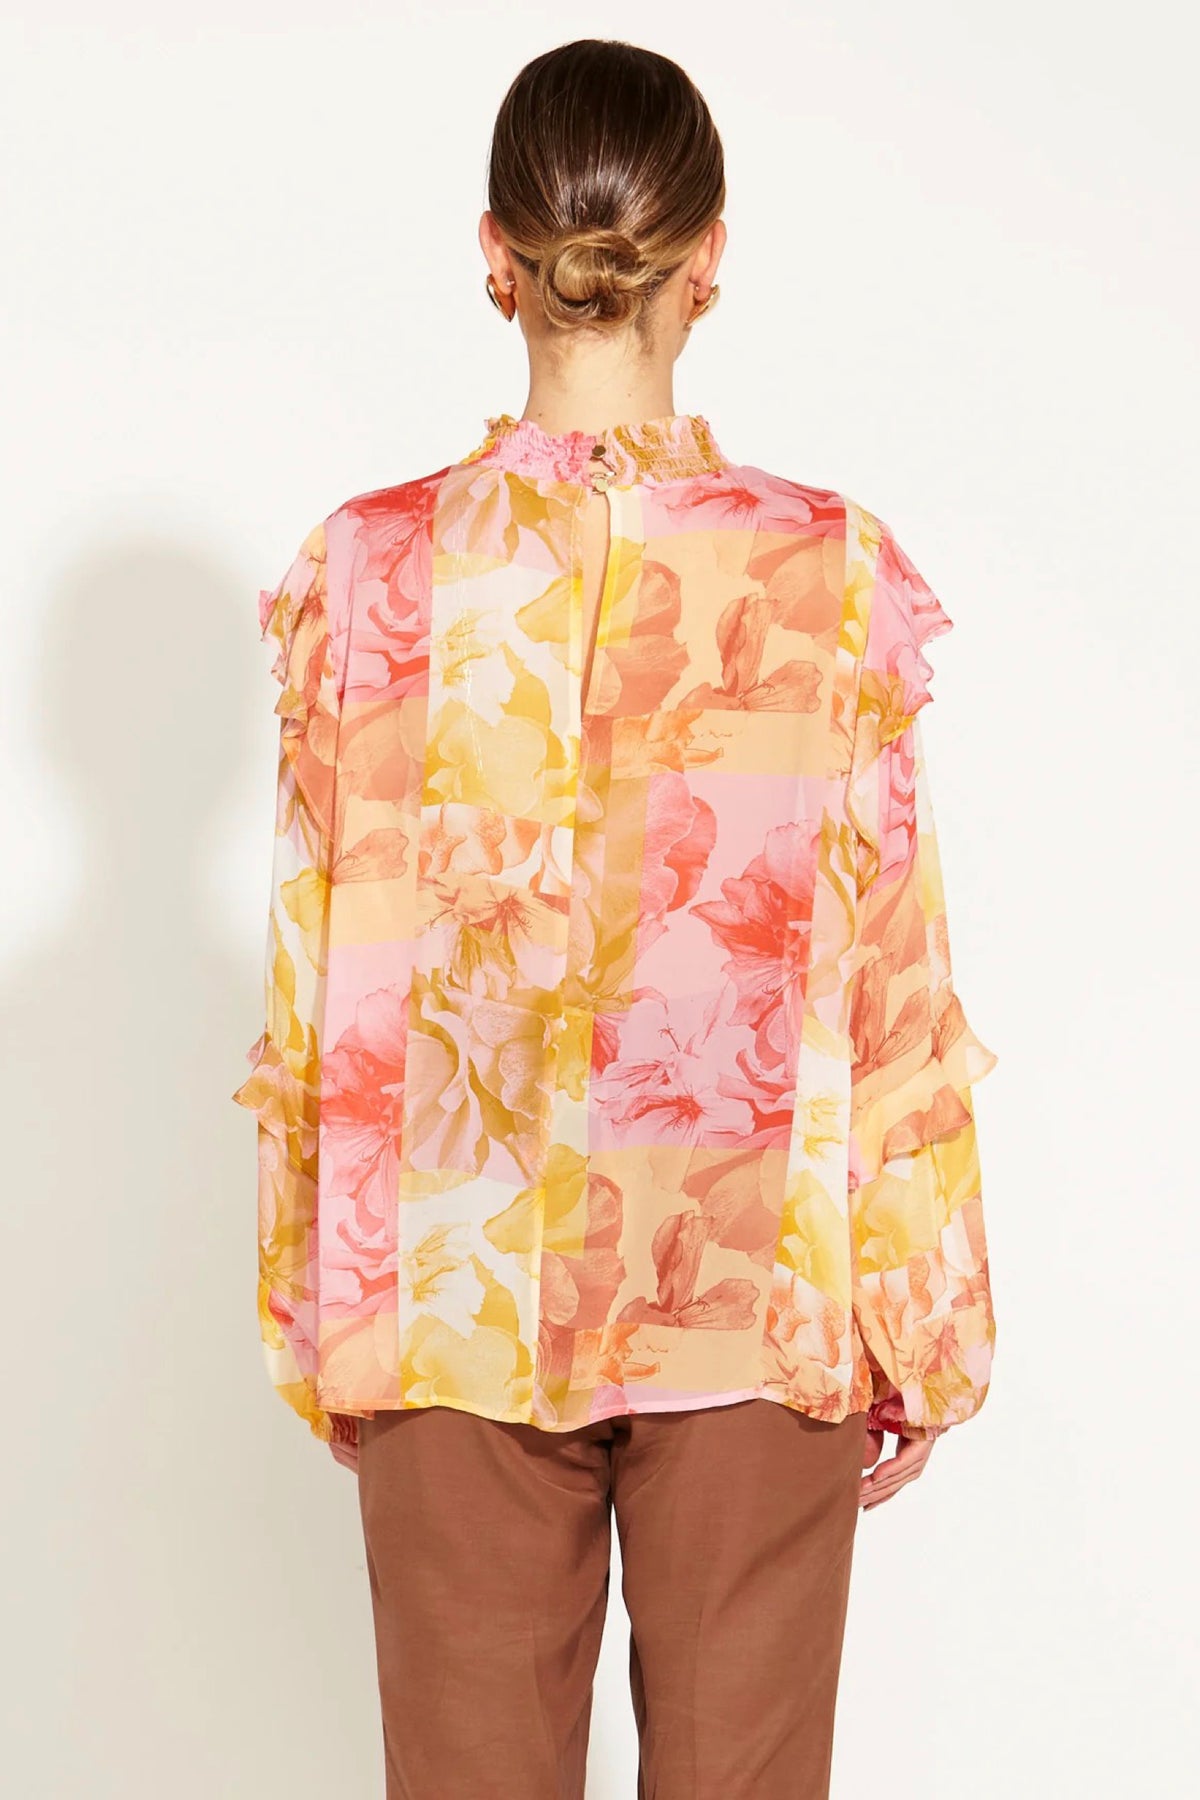 Earthly Paradise Long Sleeve Sheer Blouse Paradise Floral